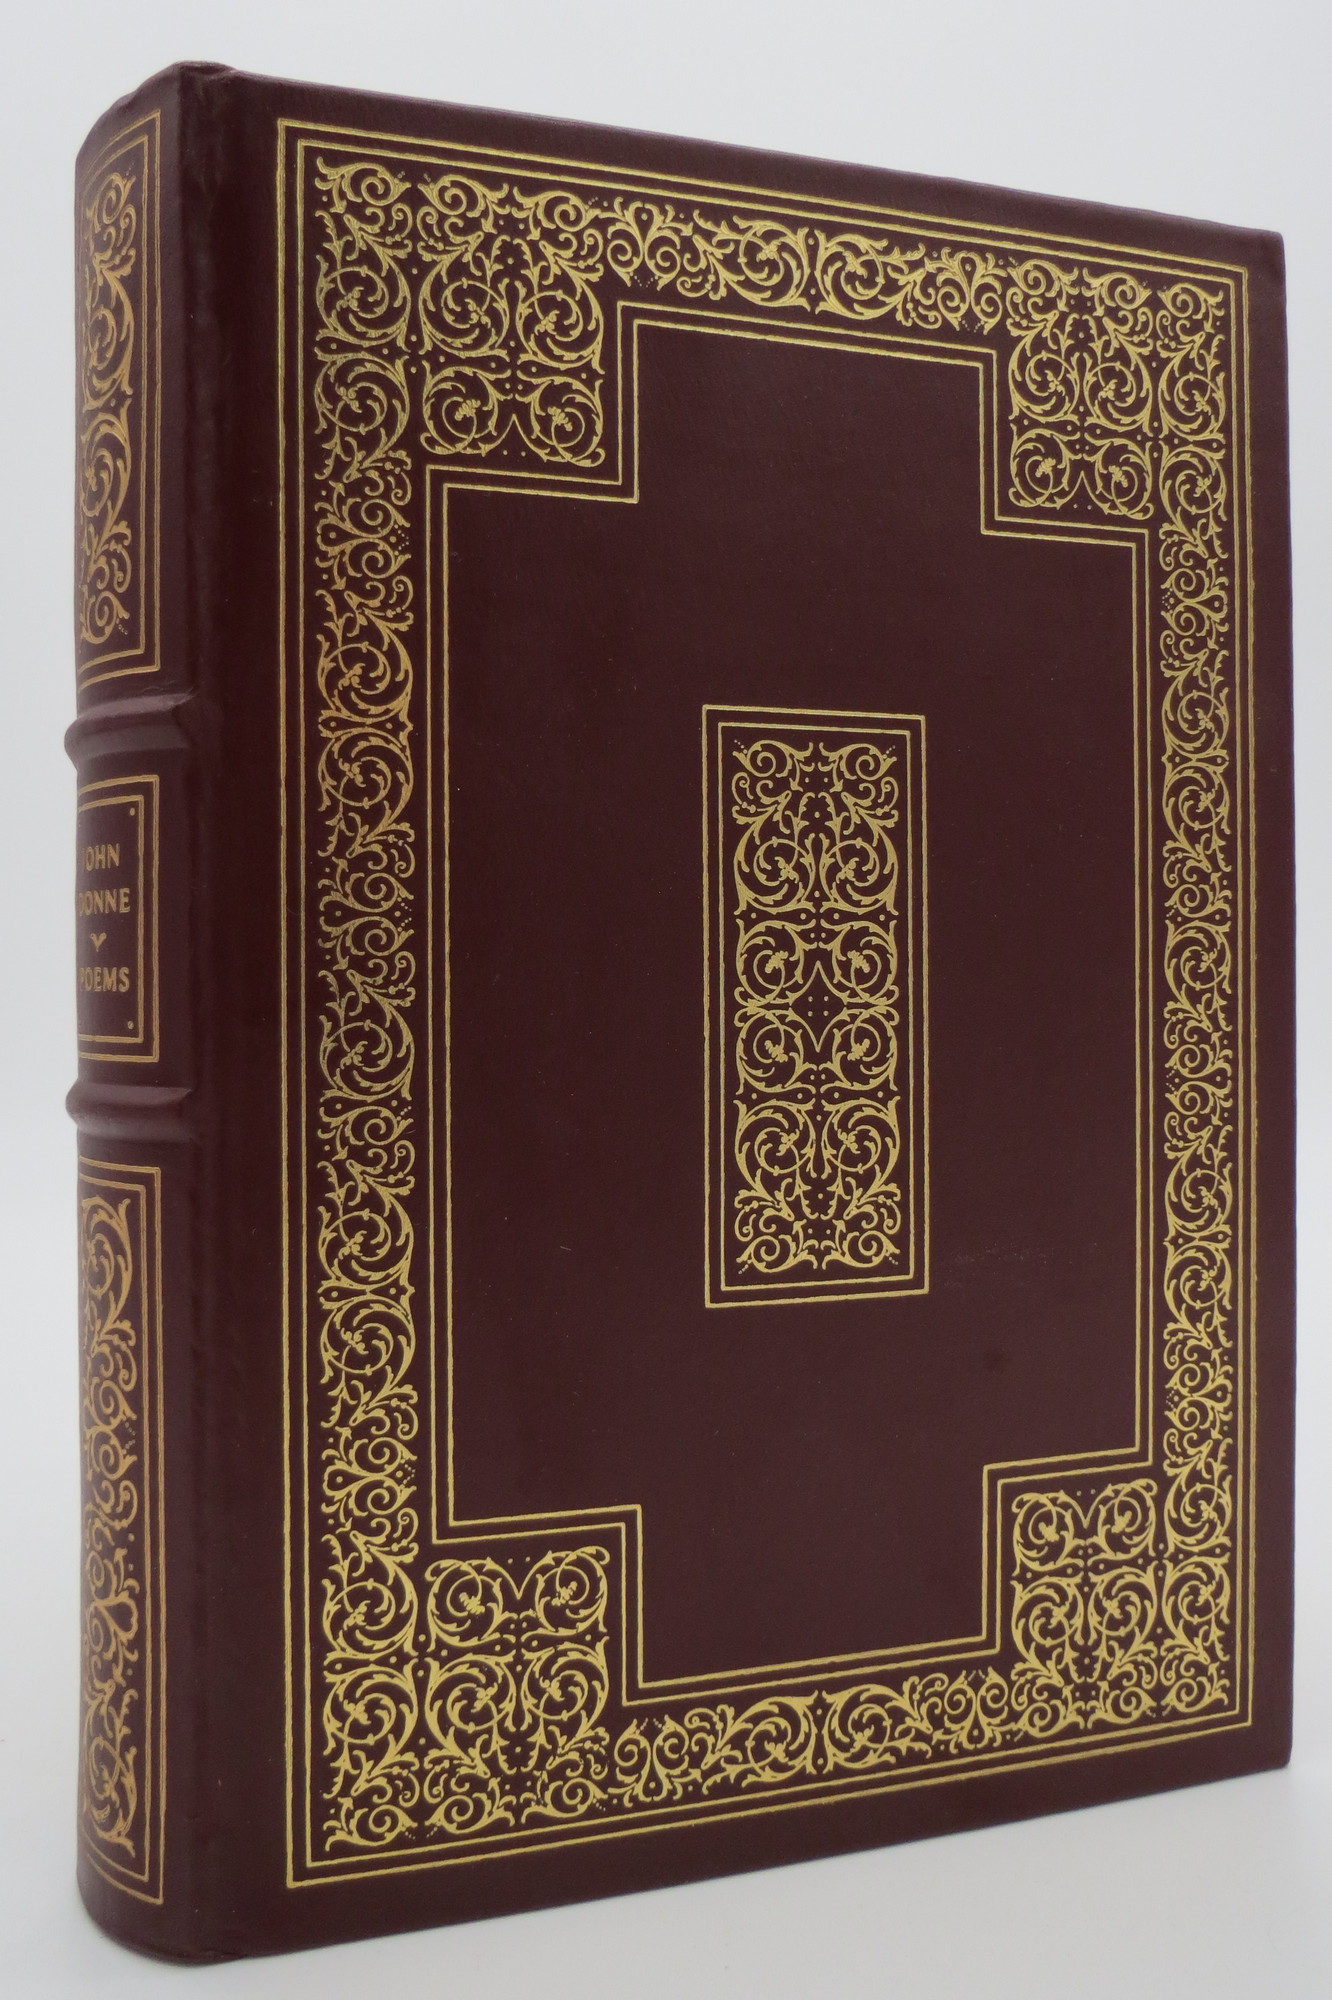 Image for JOHN DONNE Poems (Leather Bound